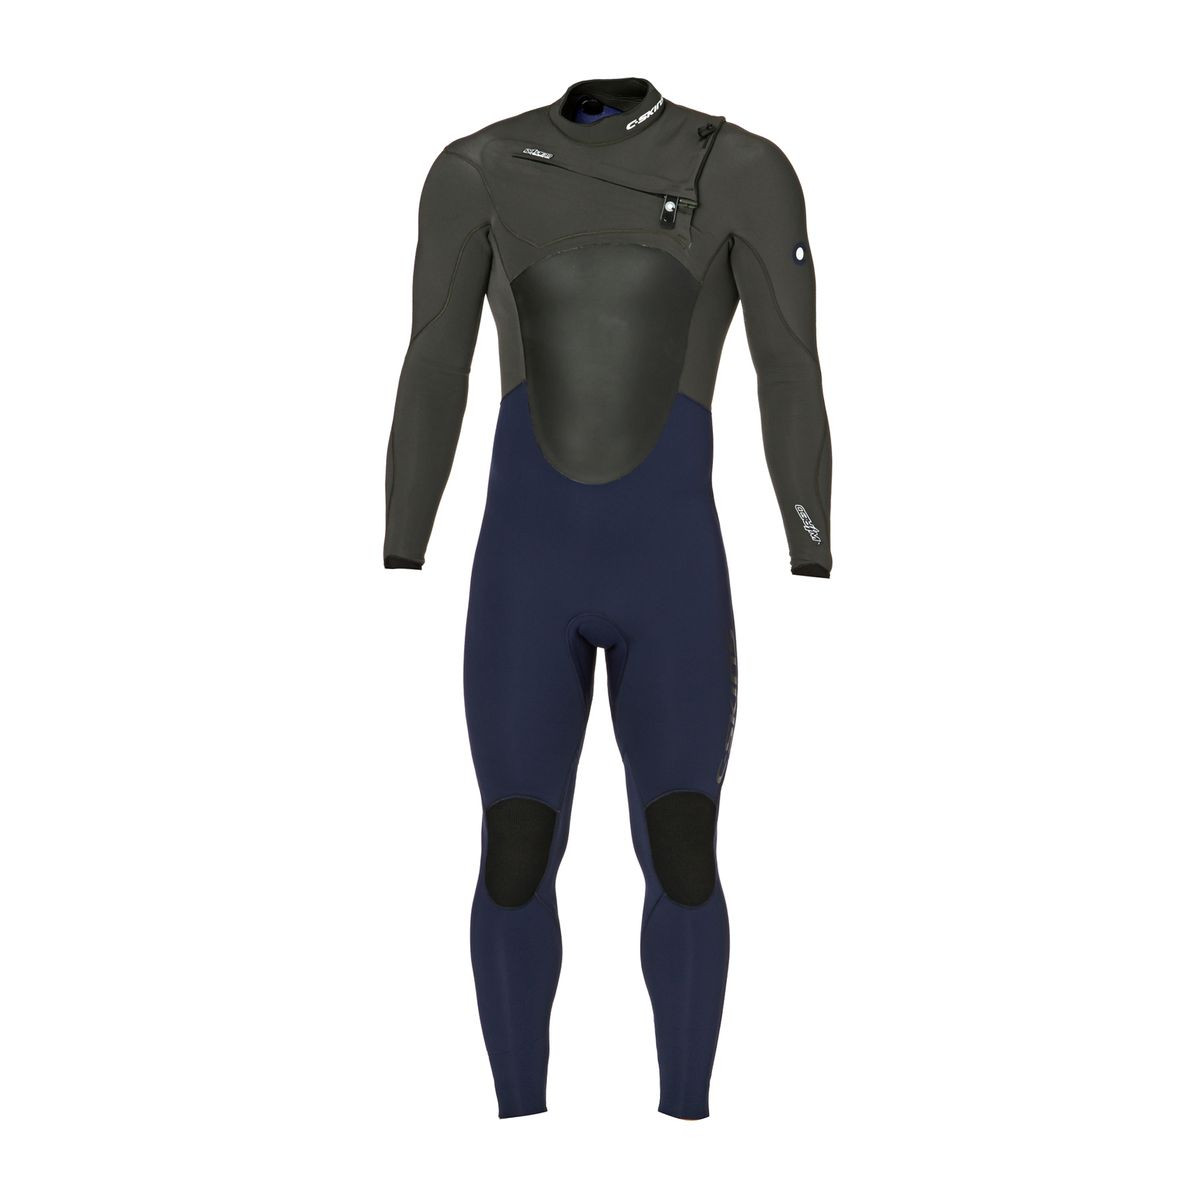 C-Skins Wired 4/3mm 2017 Chest Zip Wetsuit - Ink Blue/ Grey